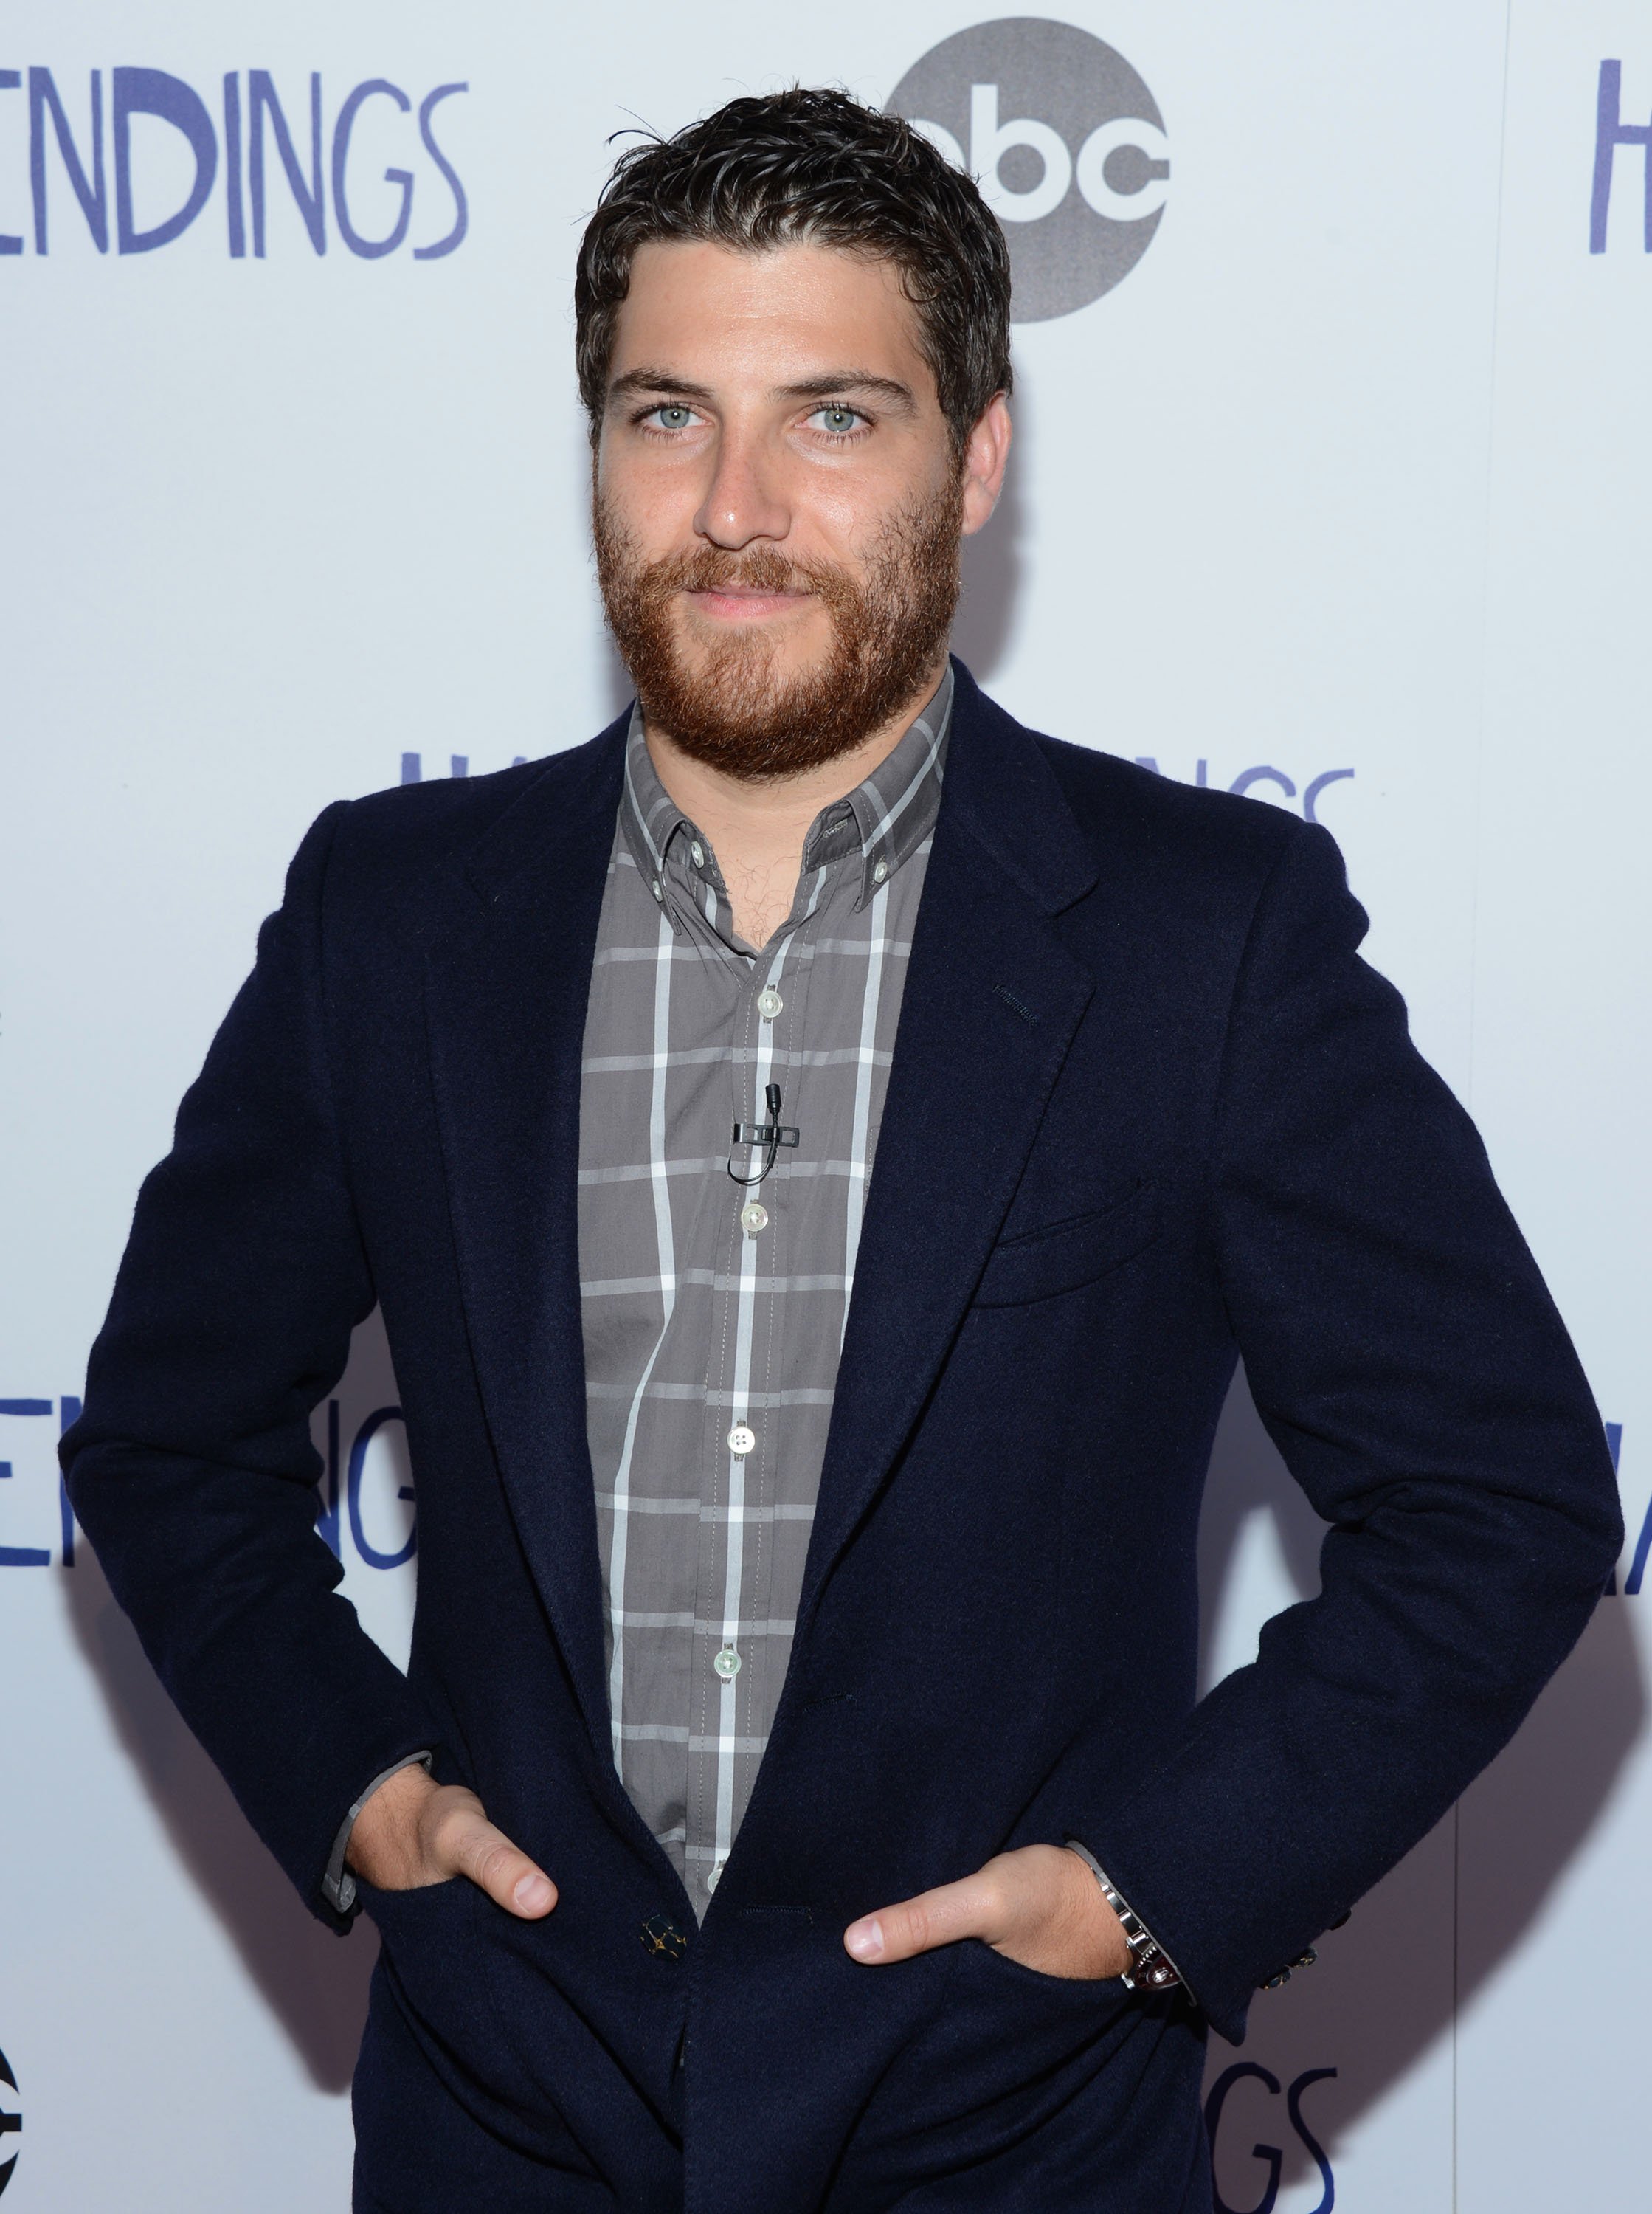 Adam Pally attends the Sony Pictures Television Hosts A Special Evening With ABC's 'Happy Endings' at the Leonard H. Goldenson Theatre on May 24, 2012 in North Hollywood